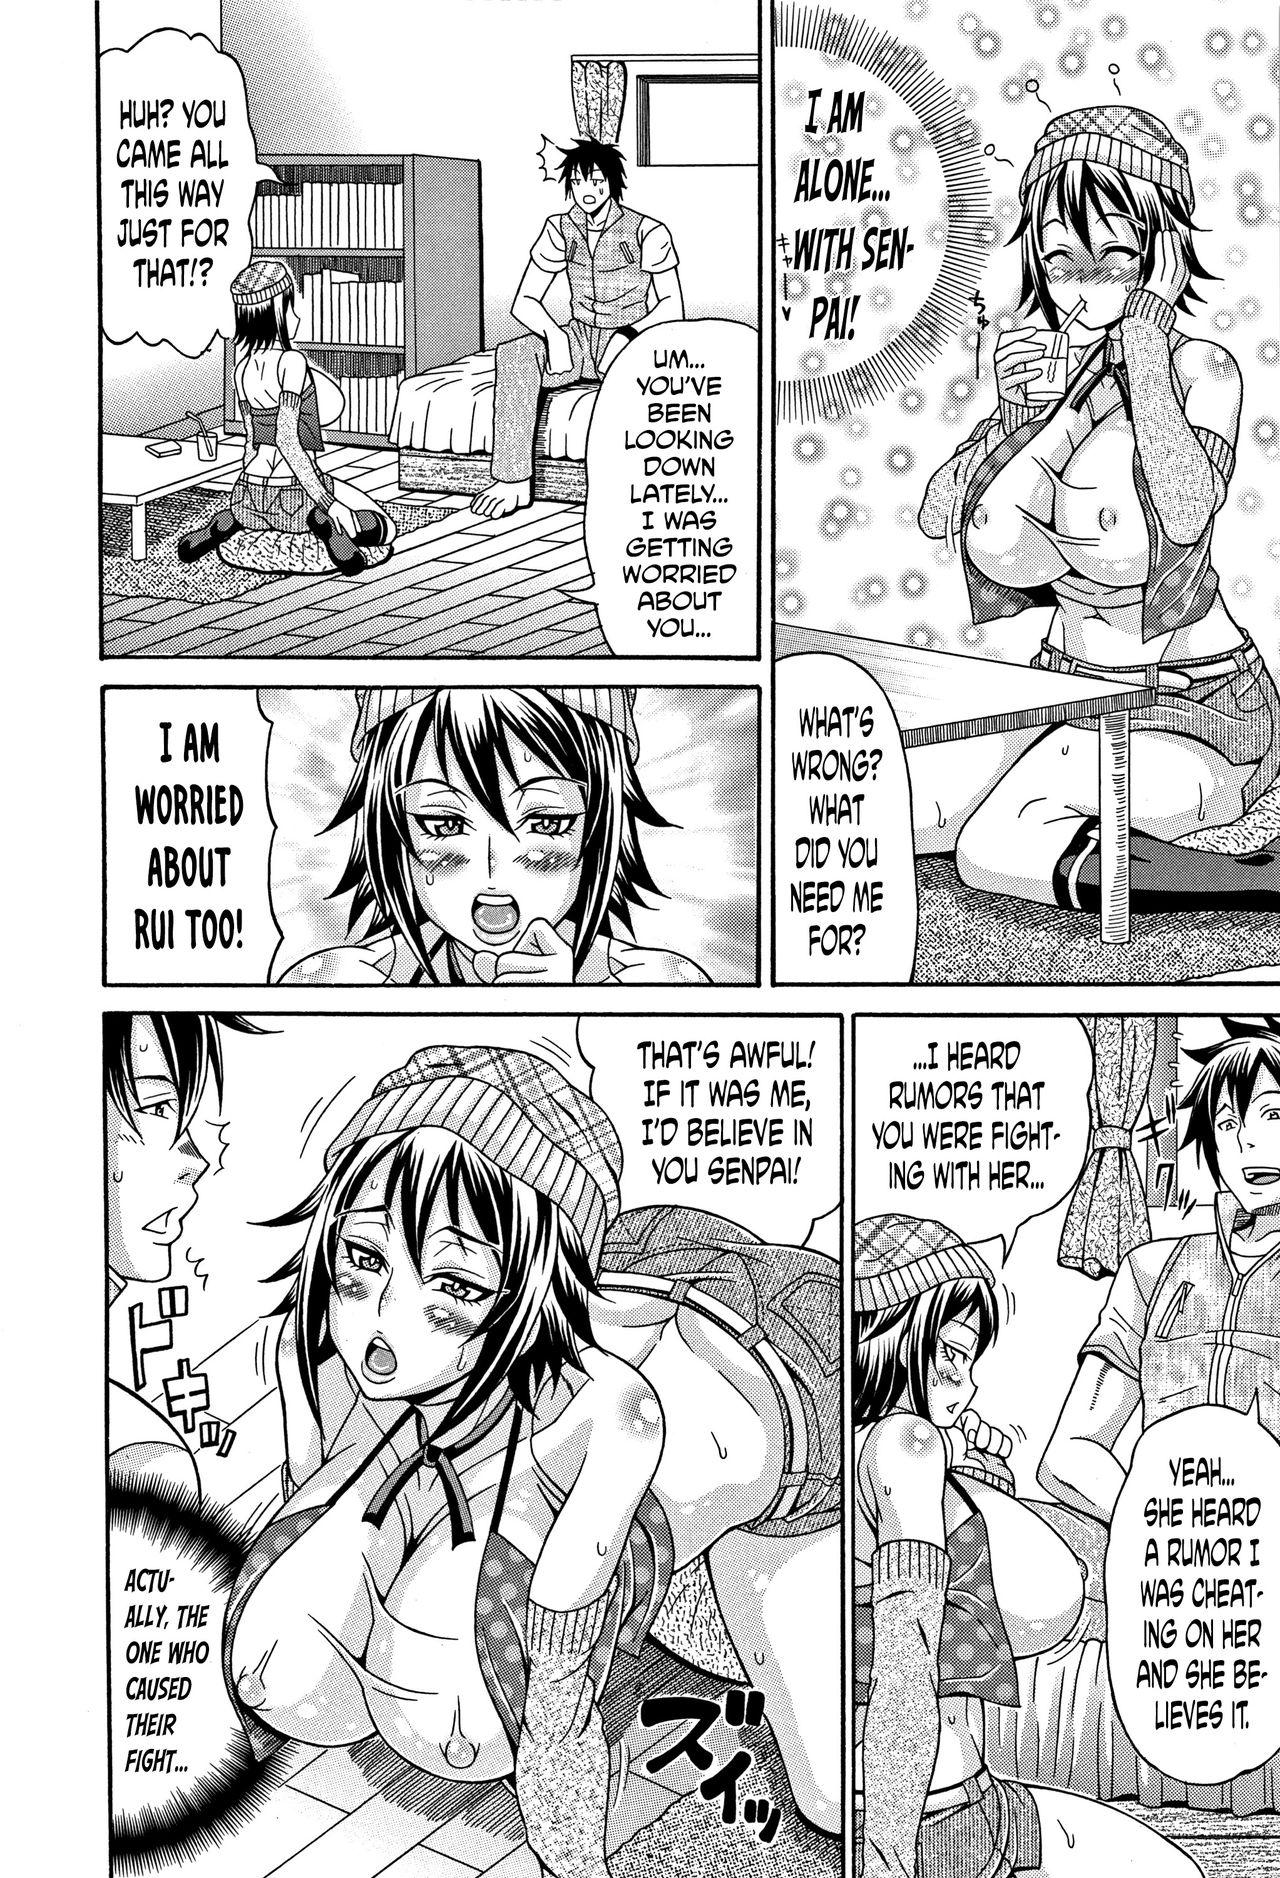 [Andou Hiroyuki] Mamire Chichi - Sticky Tits Feel Hot All Over. Ch.1-9 [English] [doujin-moe.us] 56